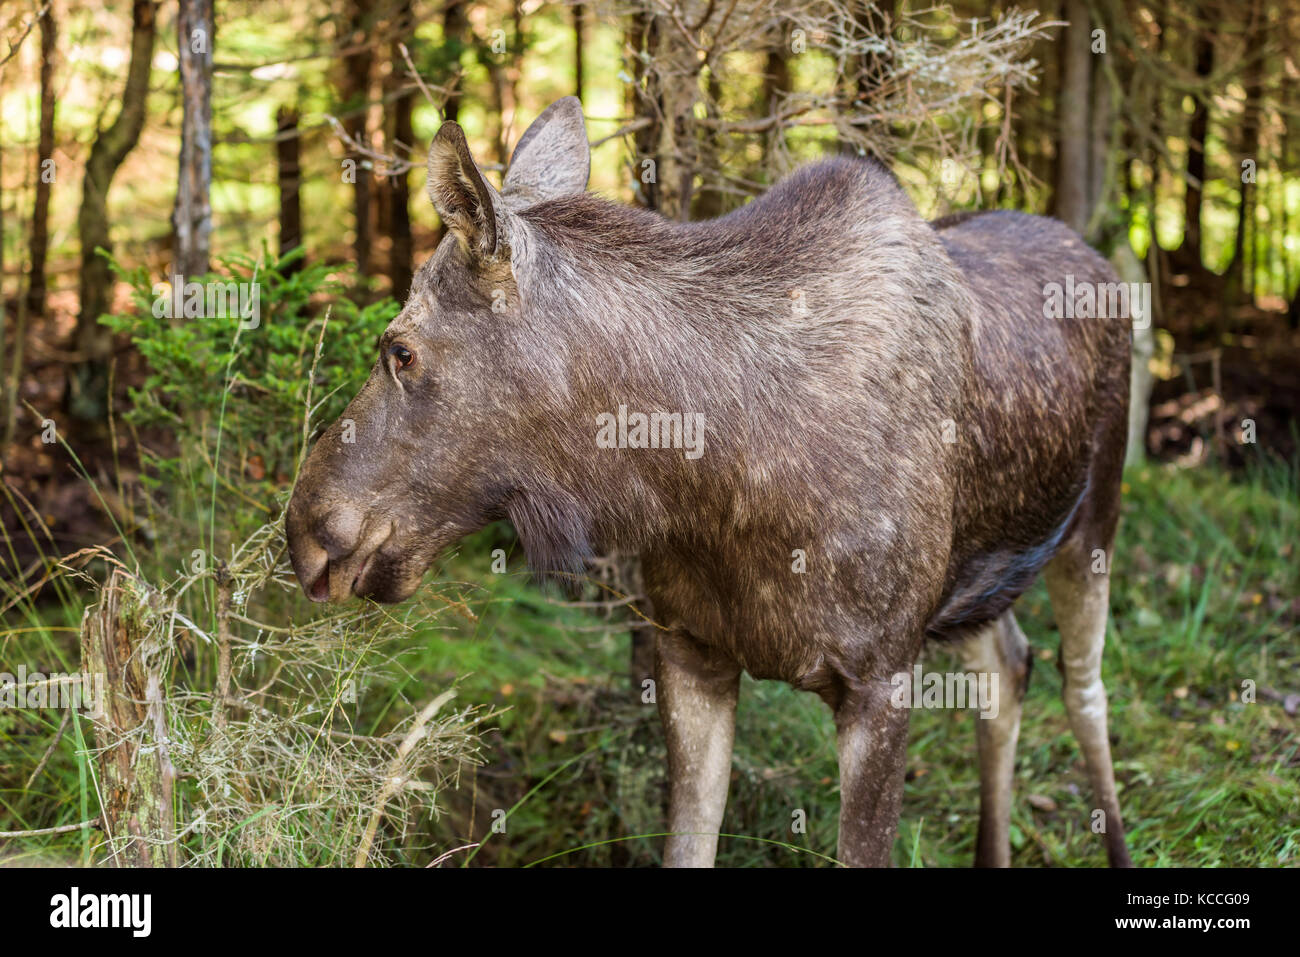 Young moose (Alces alces) standing in dense spruce forest. Stock Photo